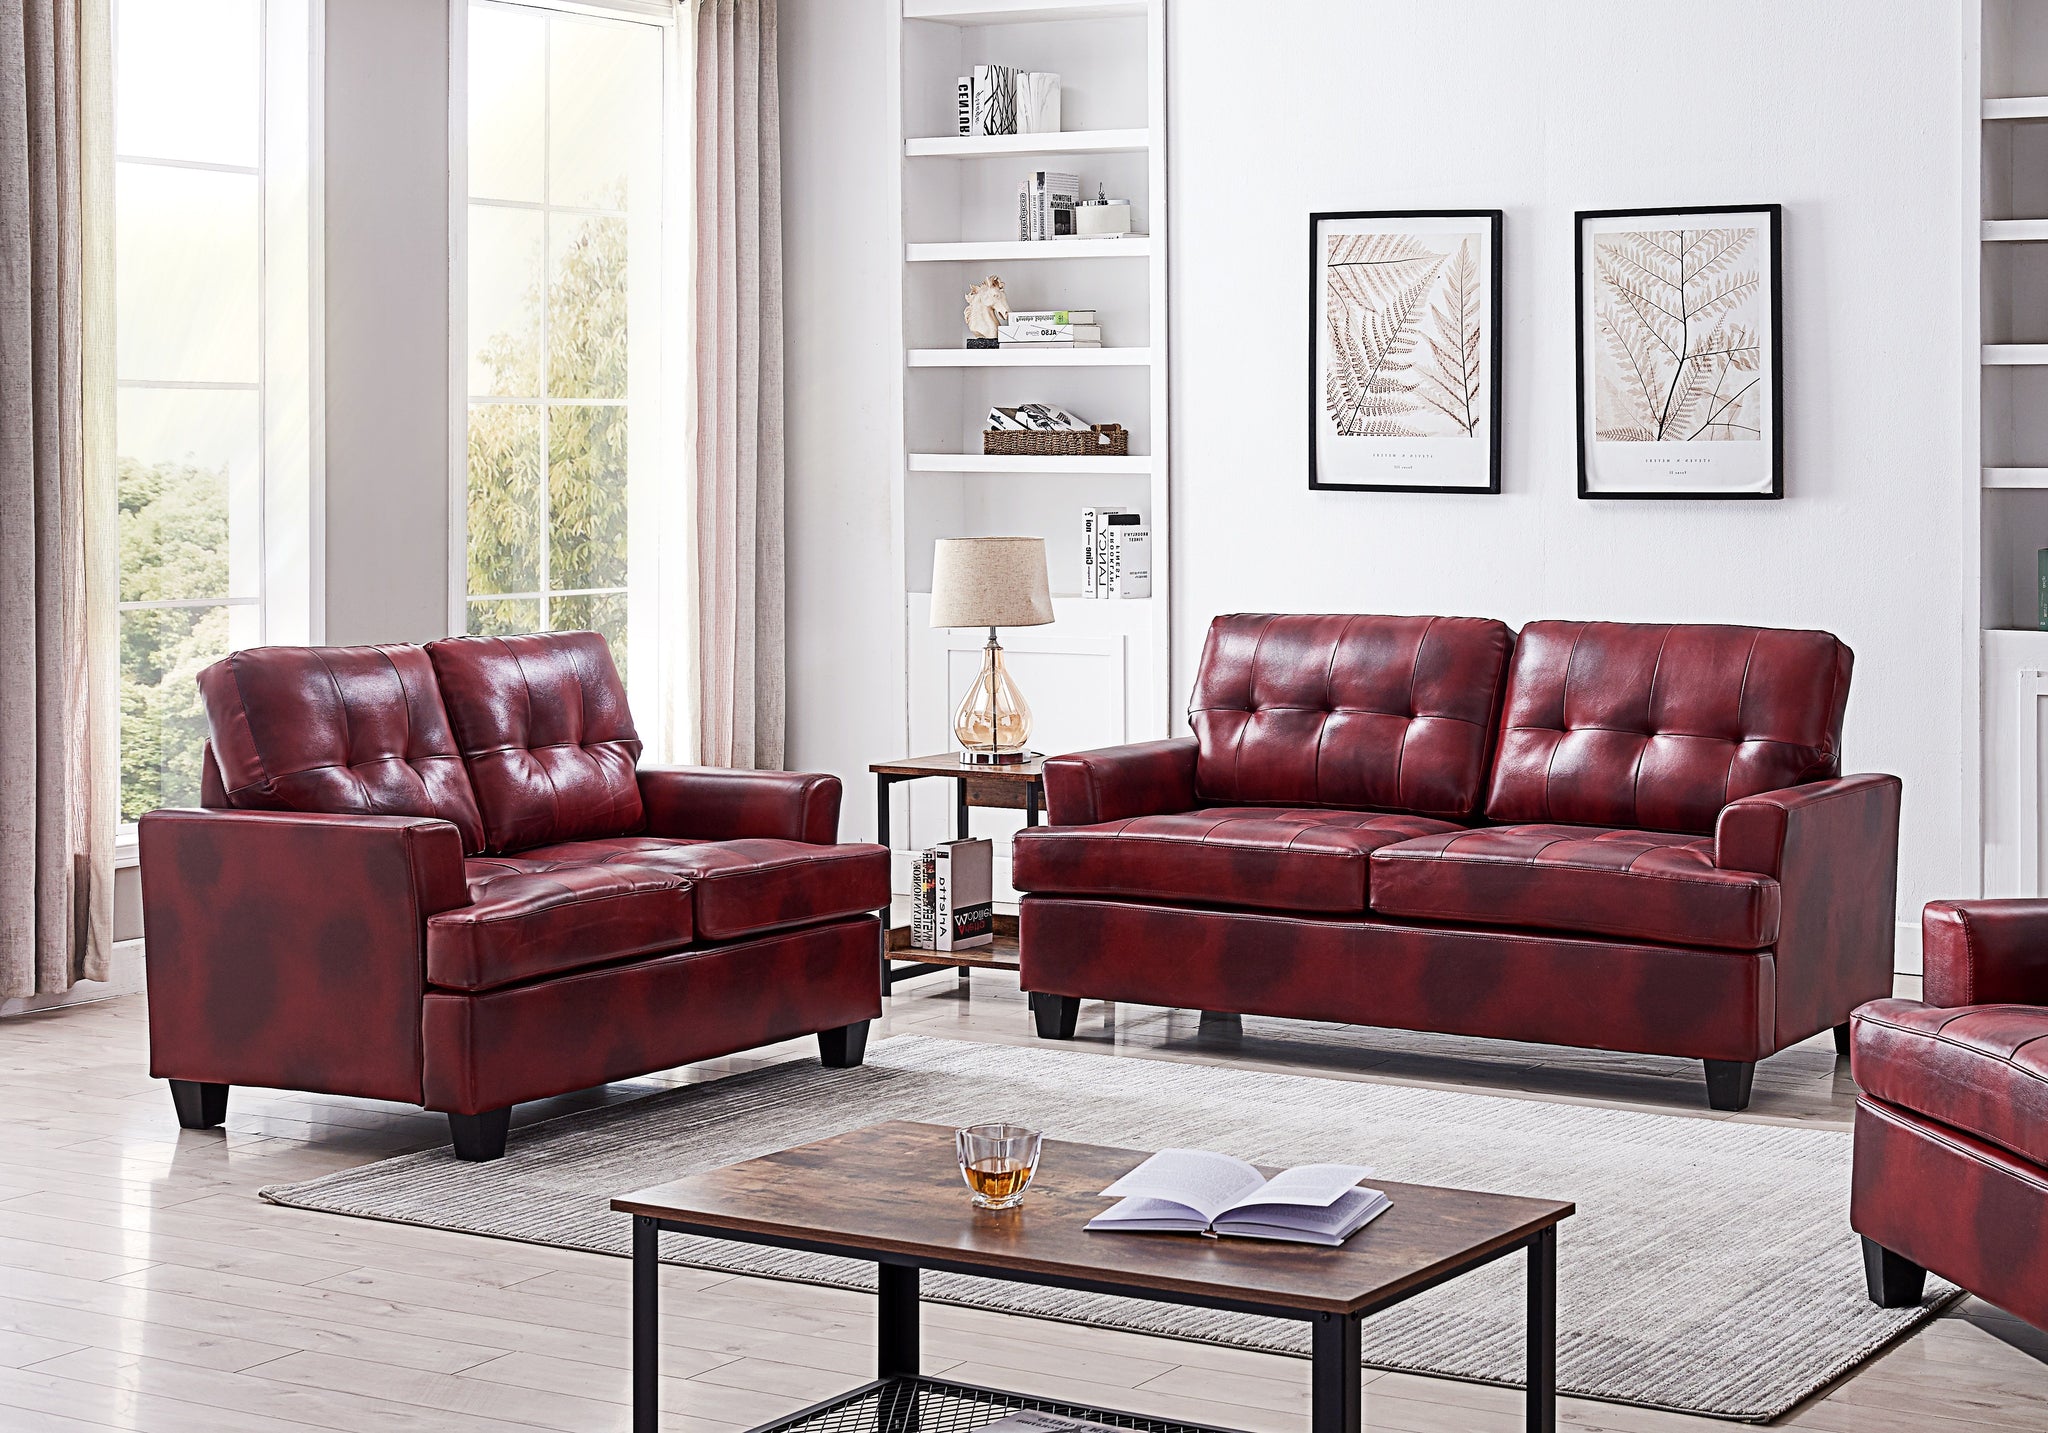 Molina 2 Piece Transitional Living Room Set Red Upholstered Faux Leather Loveseat Sofa Pilaster Designs